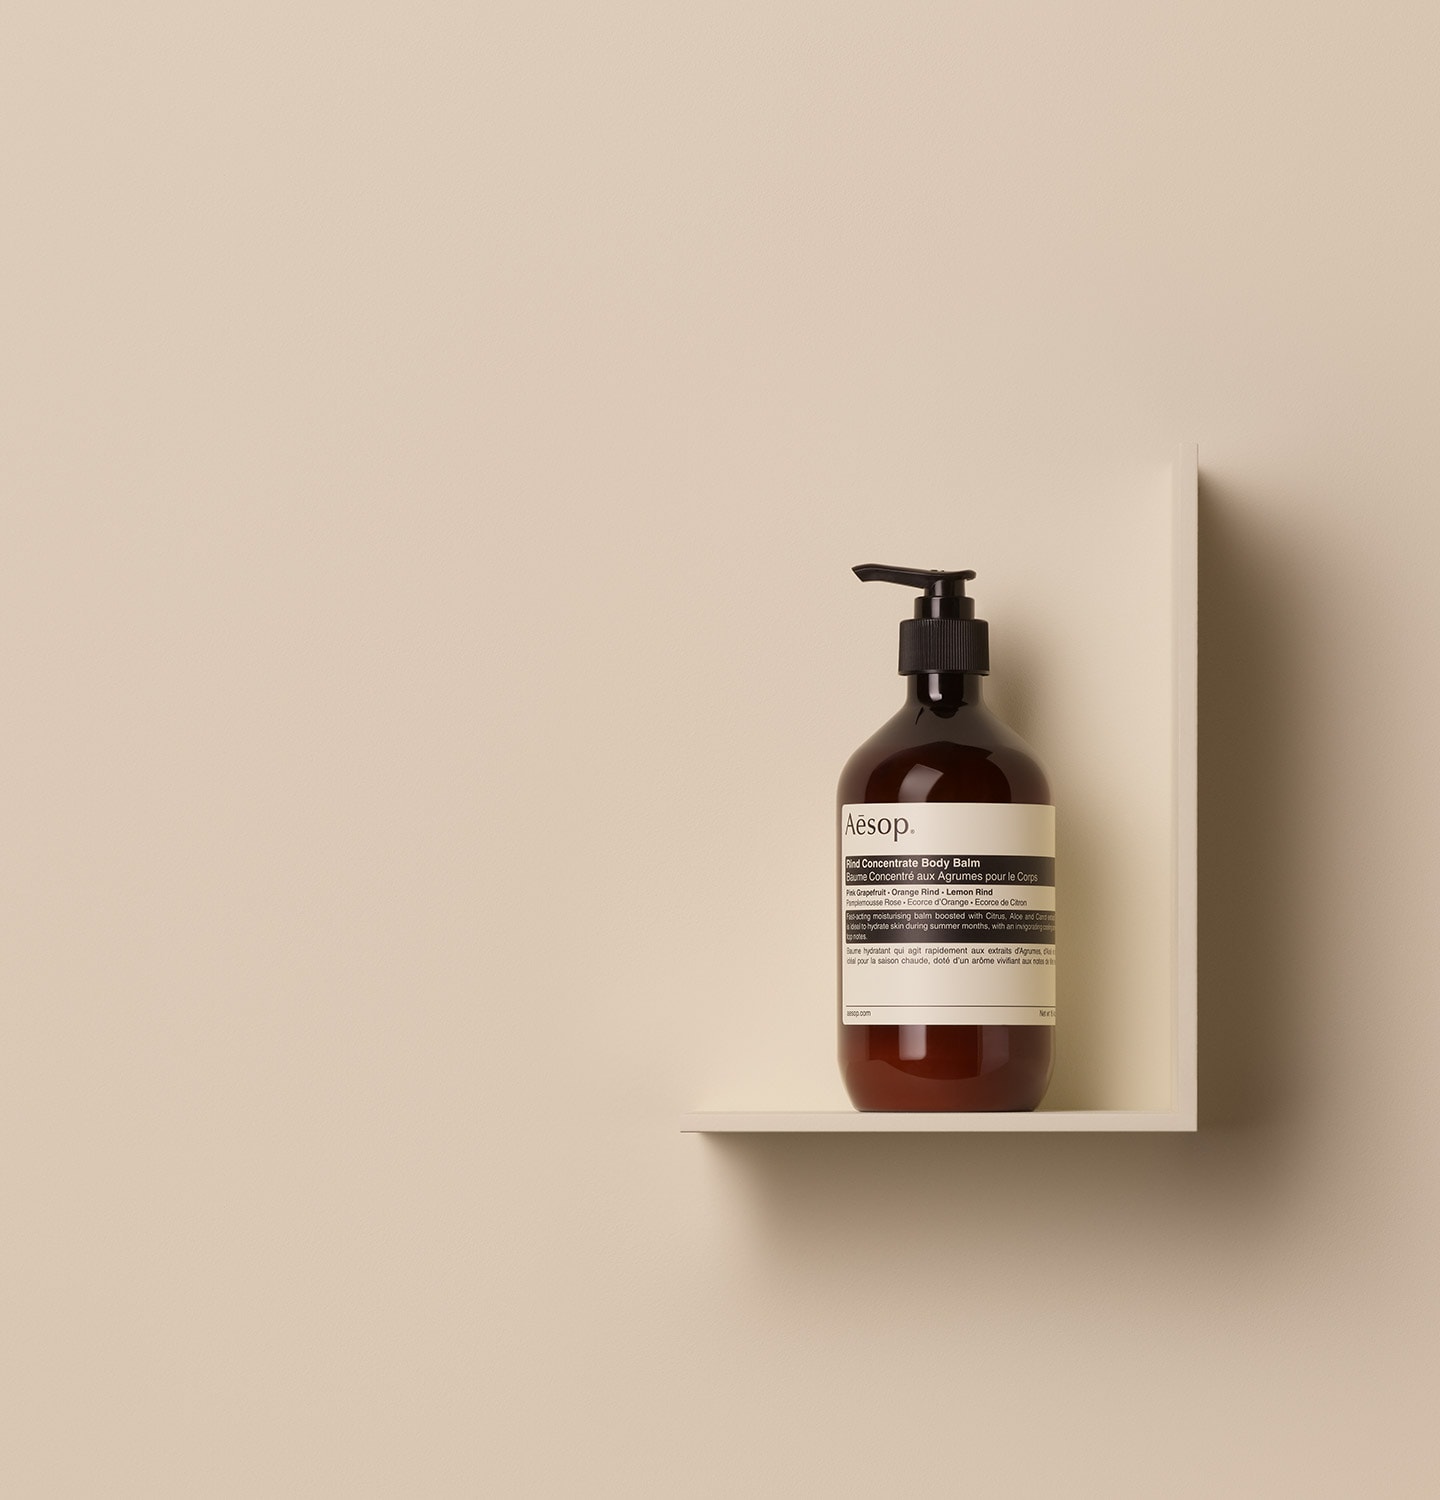 Aesop Rind Concentrate Body Balm in 500ml amber pump bottle, placed on a shelf in a beige background